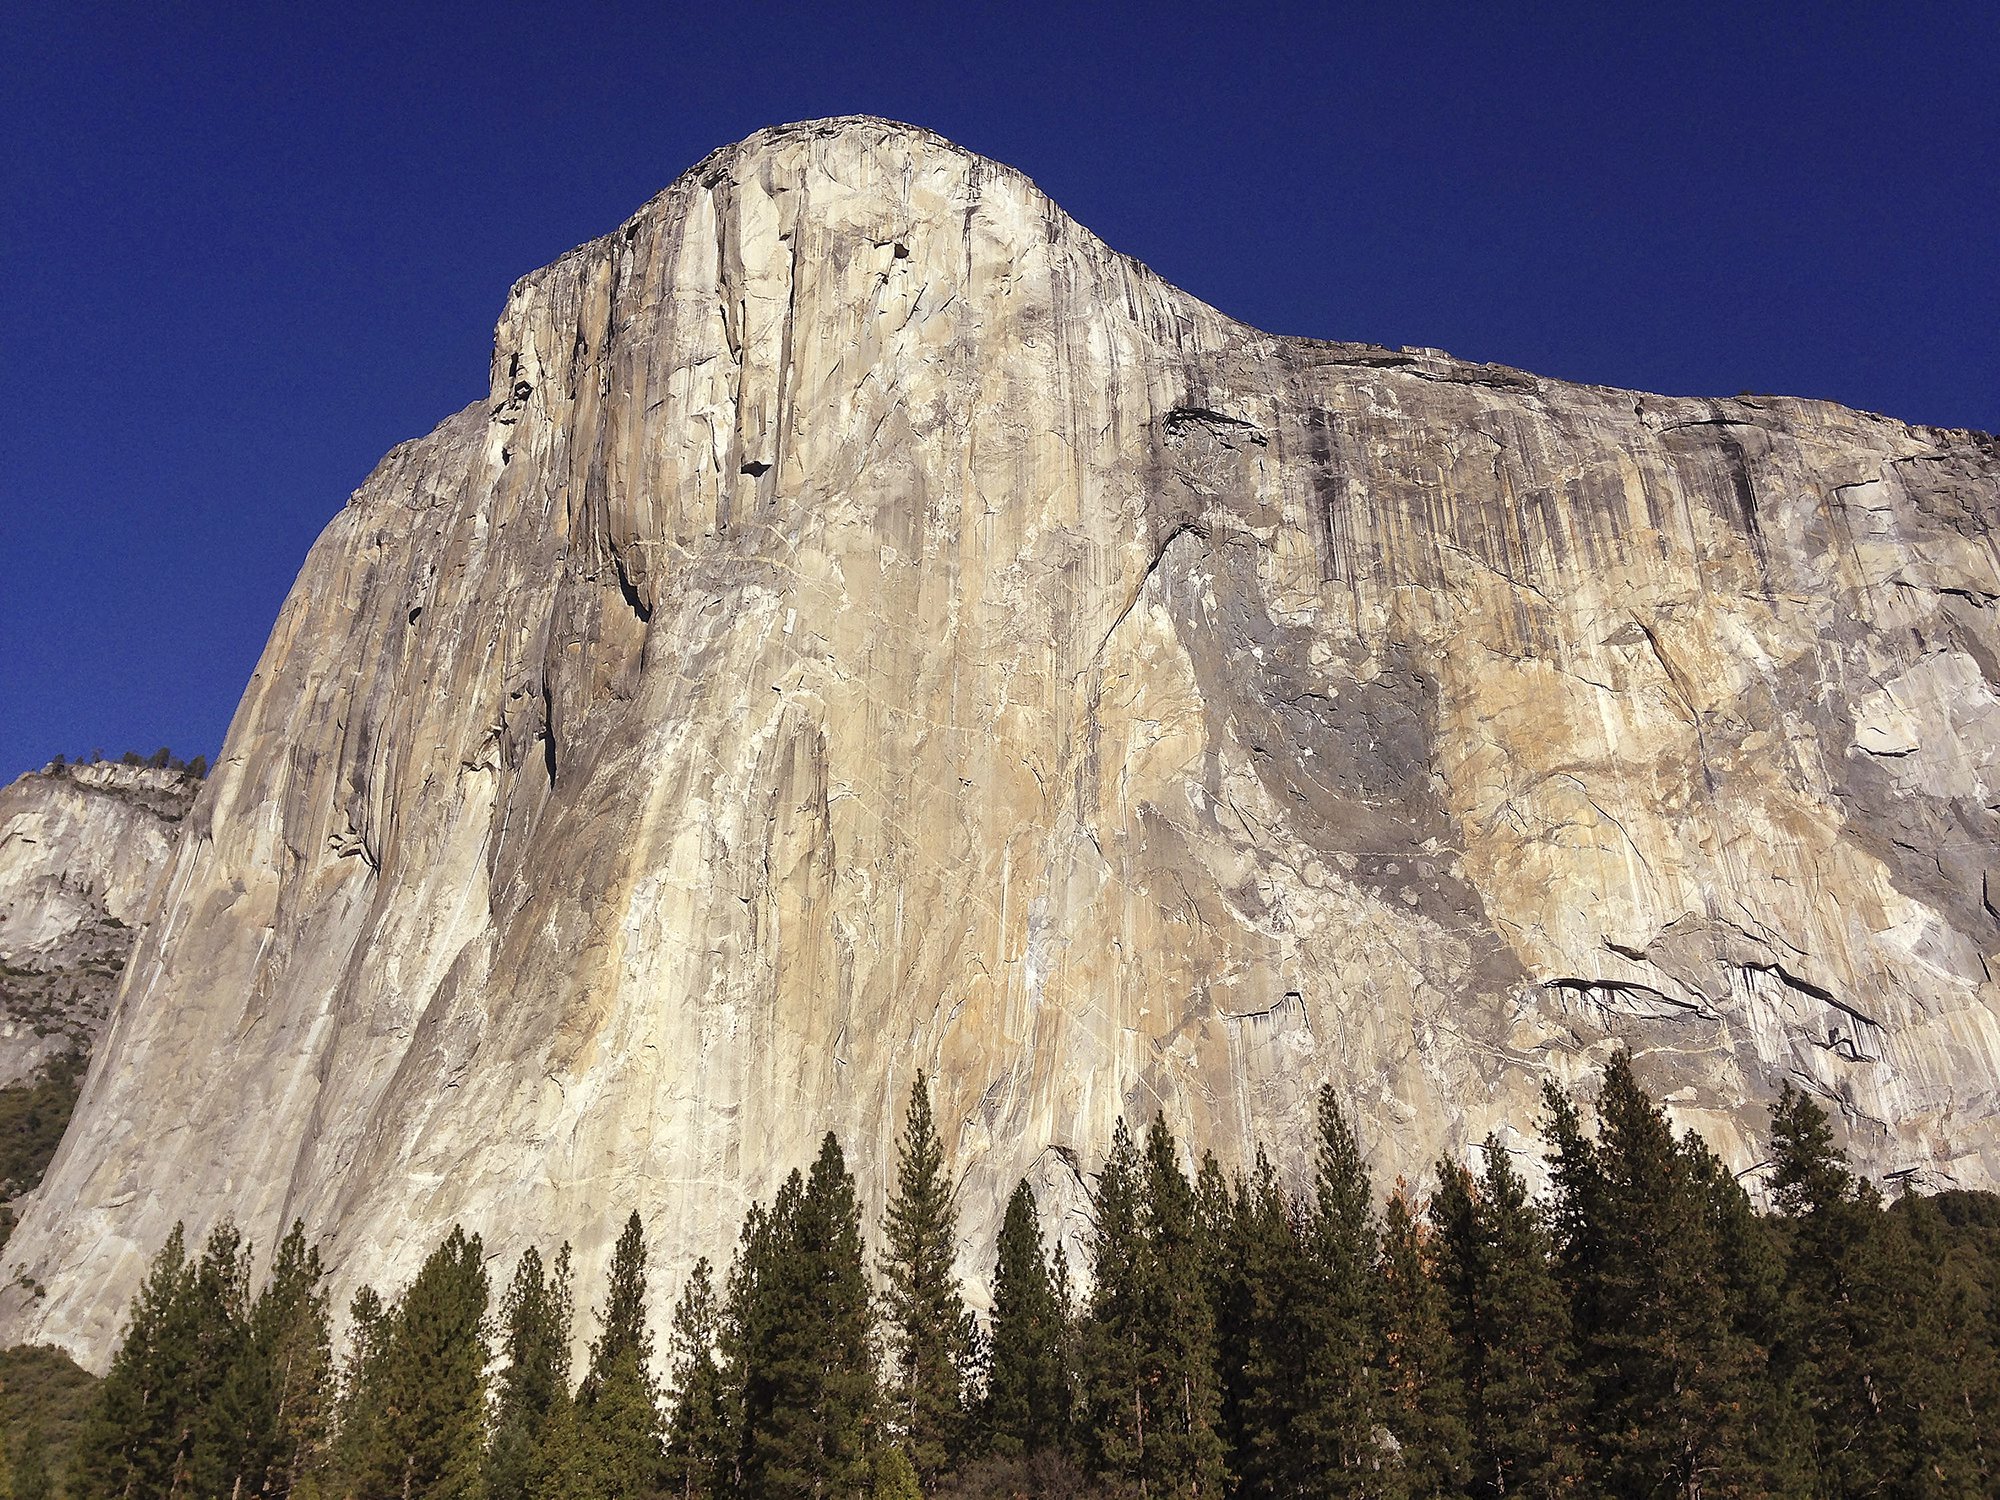 Climber Is First Woman To Free-Climb El Capitan Route in Under 24 Hours